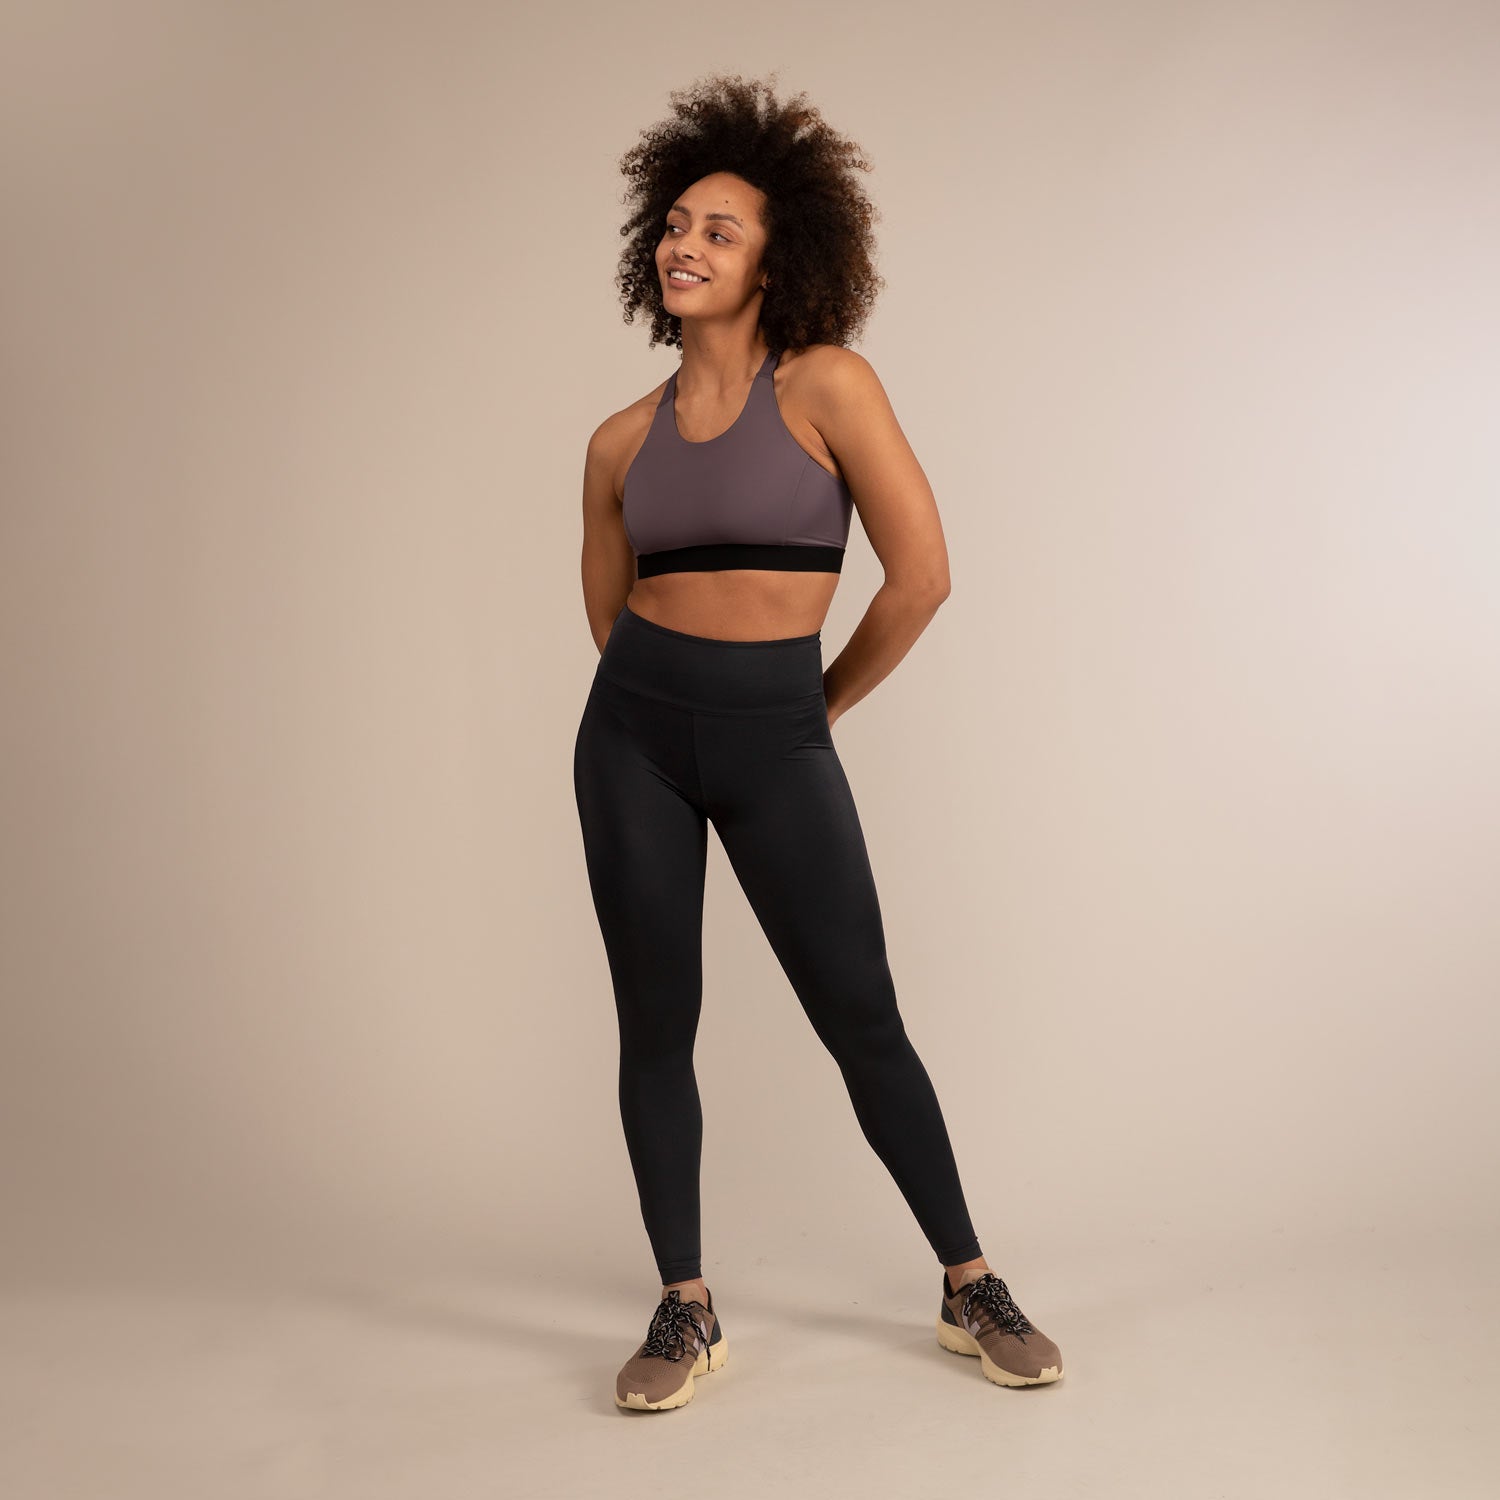 TITAN BLACK LEGGINGS | Recycled Leggings | 3RD ROCK Clothing -  Kendal is 5ft 7 with a 28" waist, 38" hips and wears a size 12 F